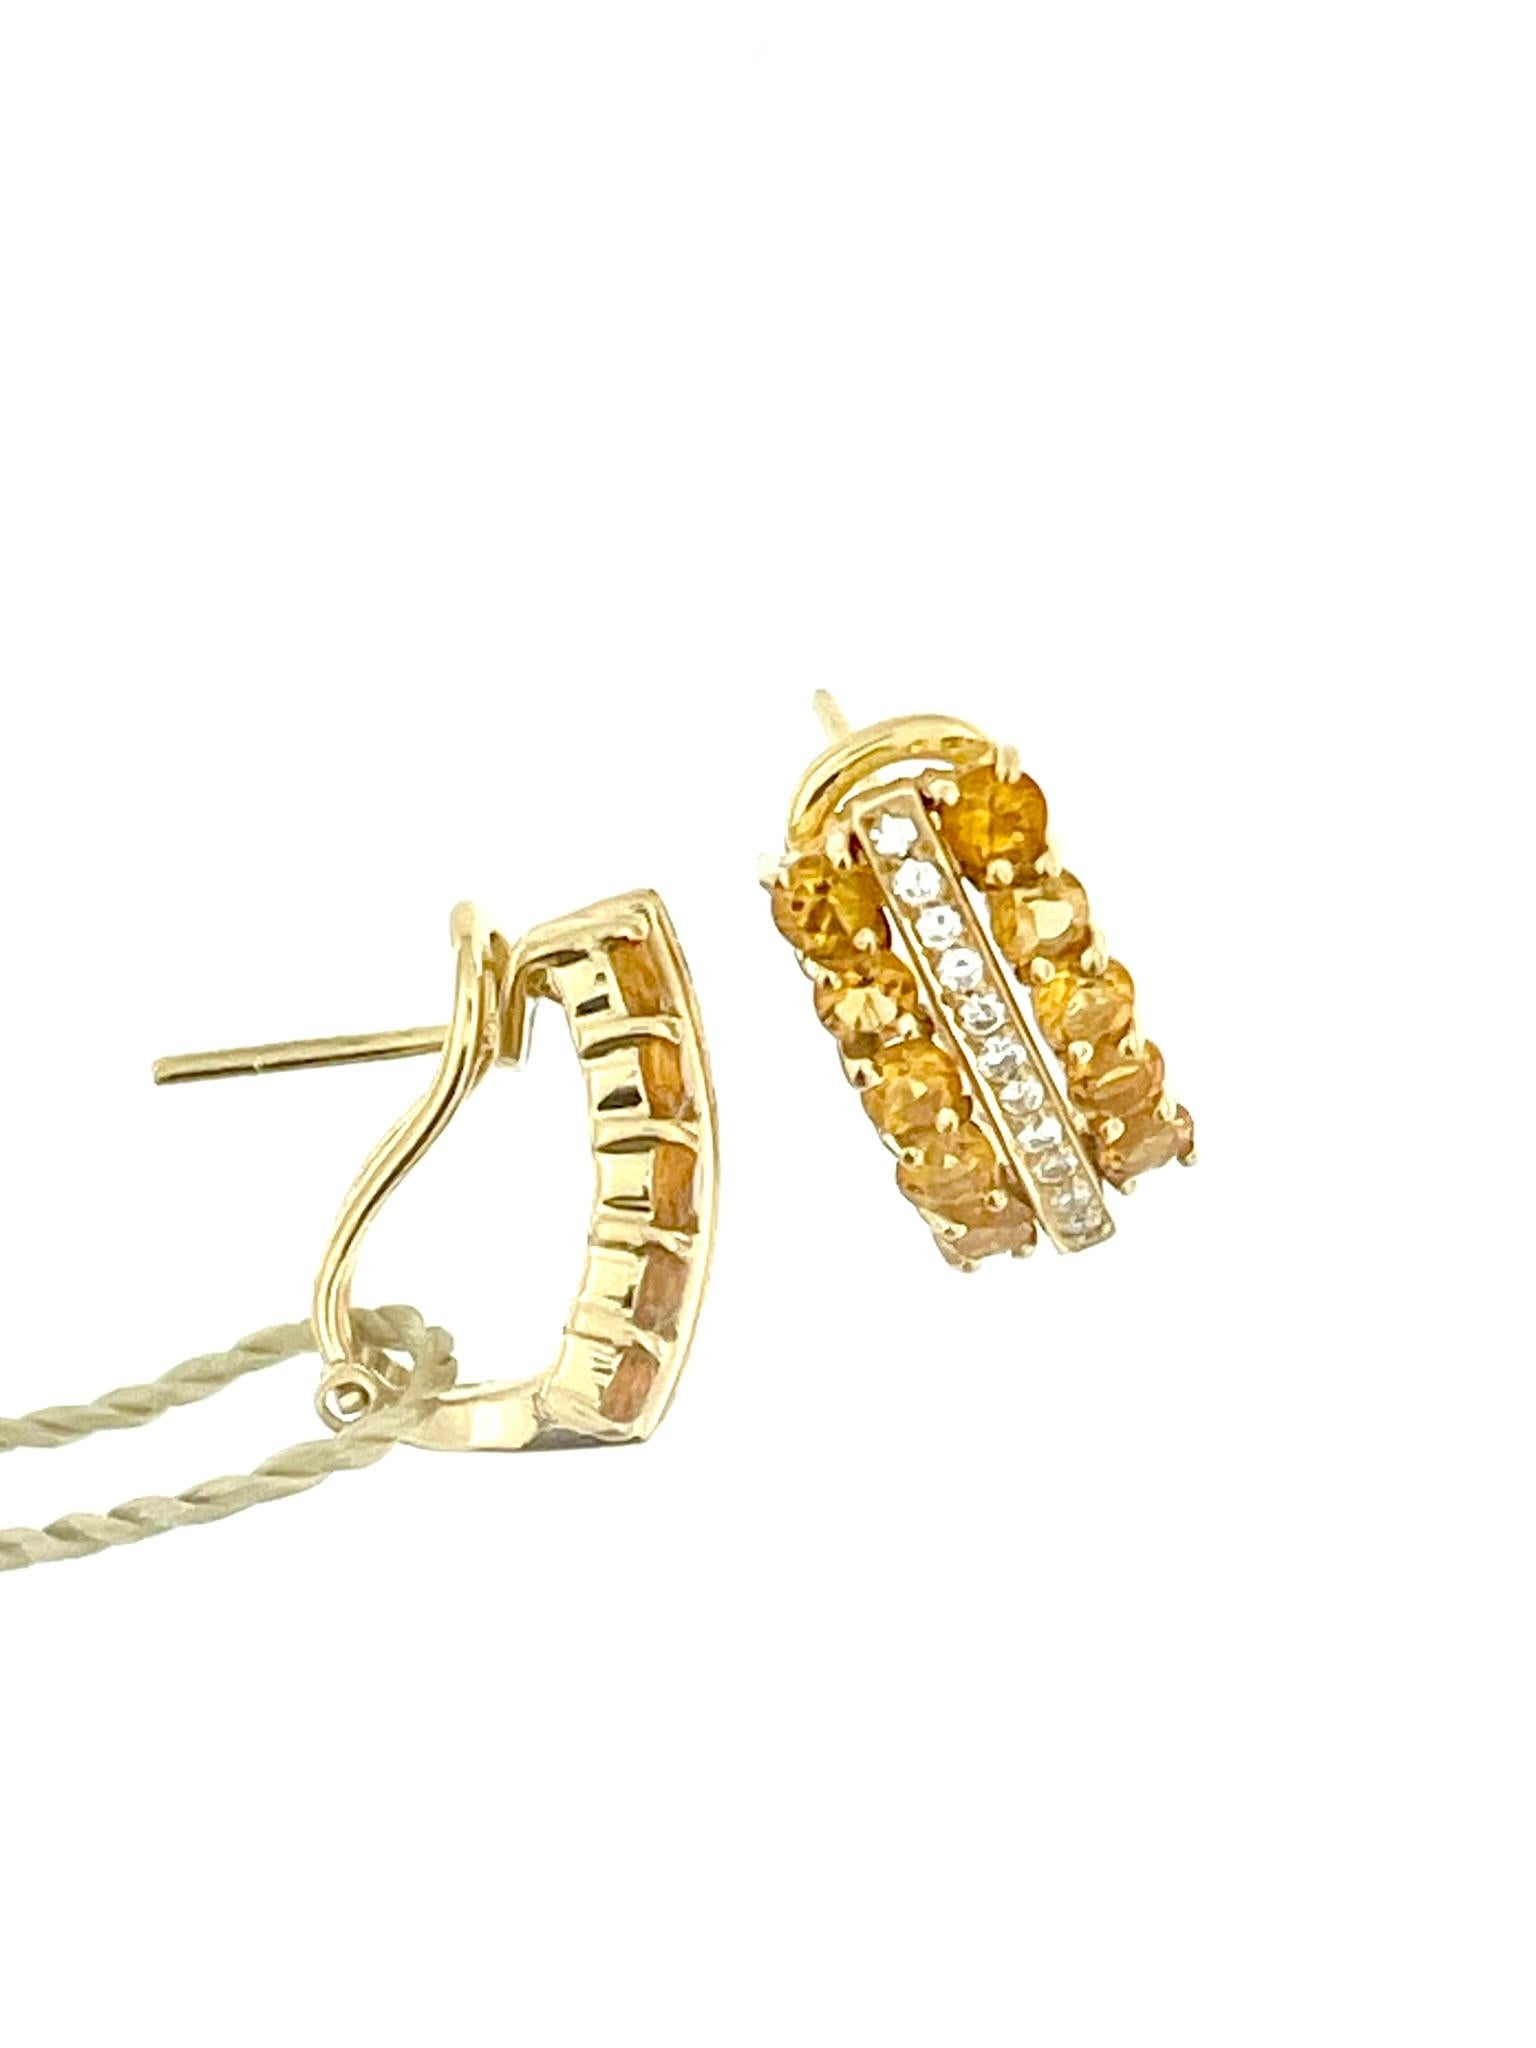 Citrines and Diamonds Jewelry Set 18kt Yellow Gold In Excellent Condition For Sale In Esch-Sur-Alzette, LU